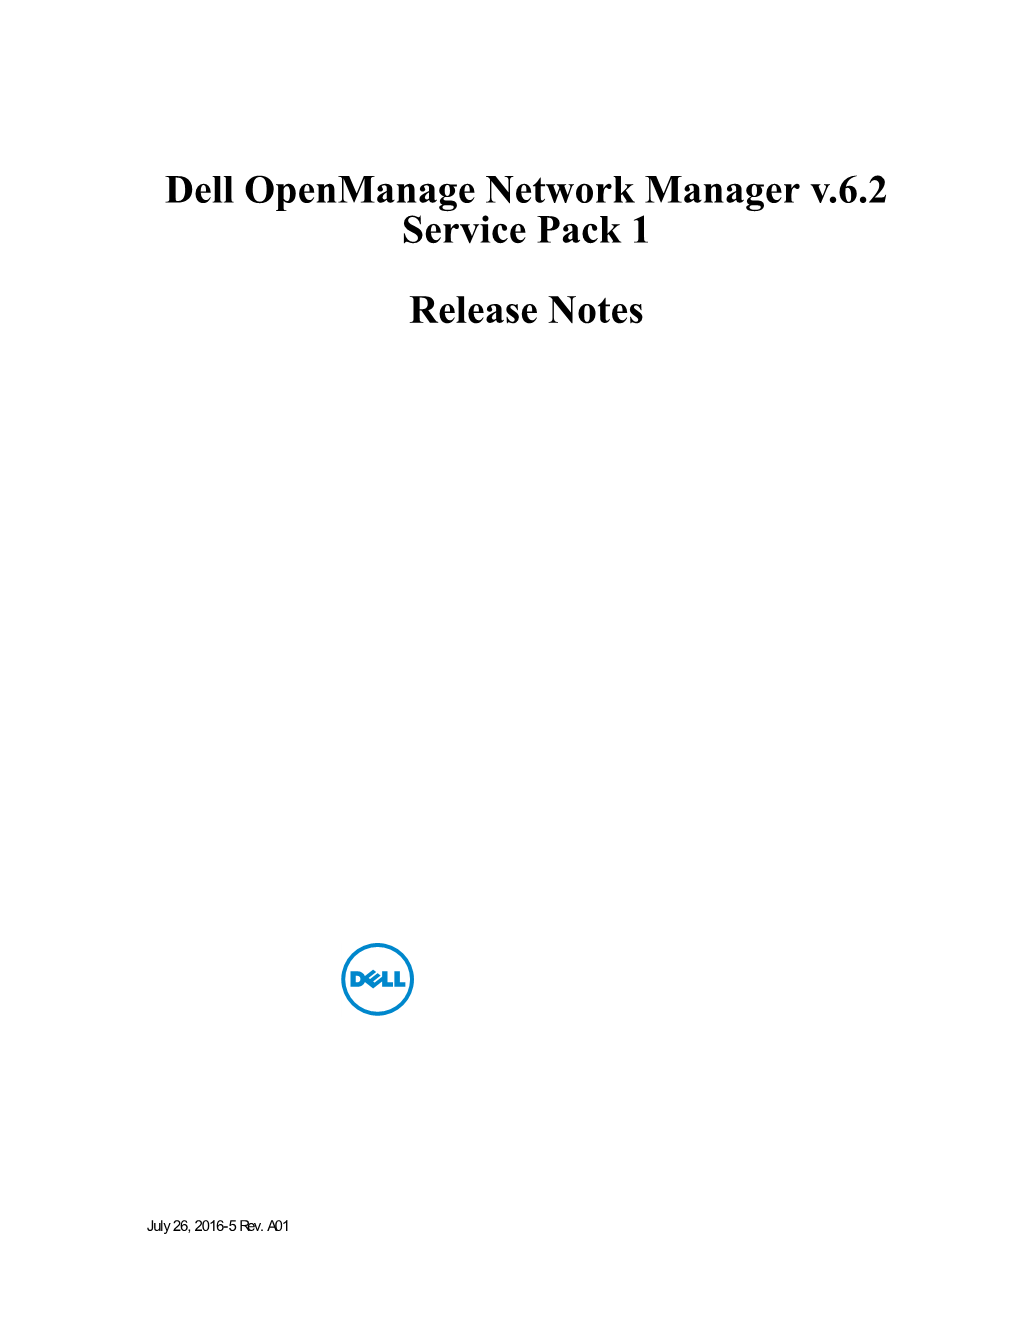 Openmanage Network Manager Release Notes